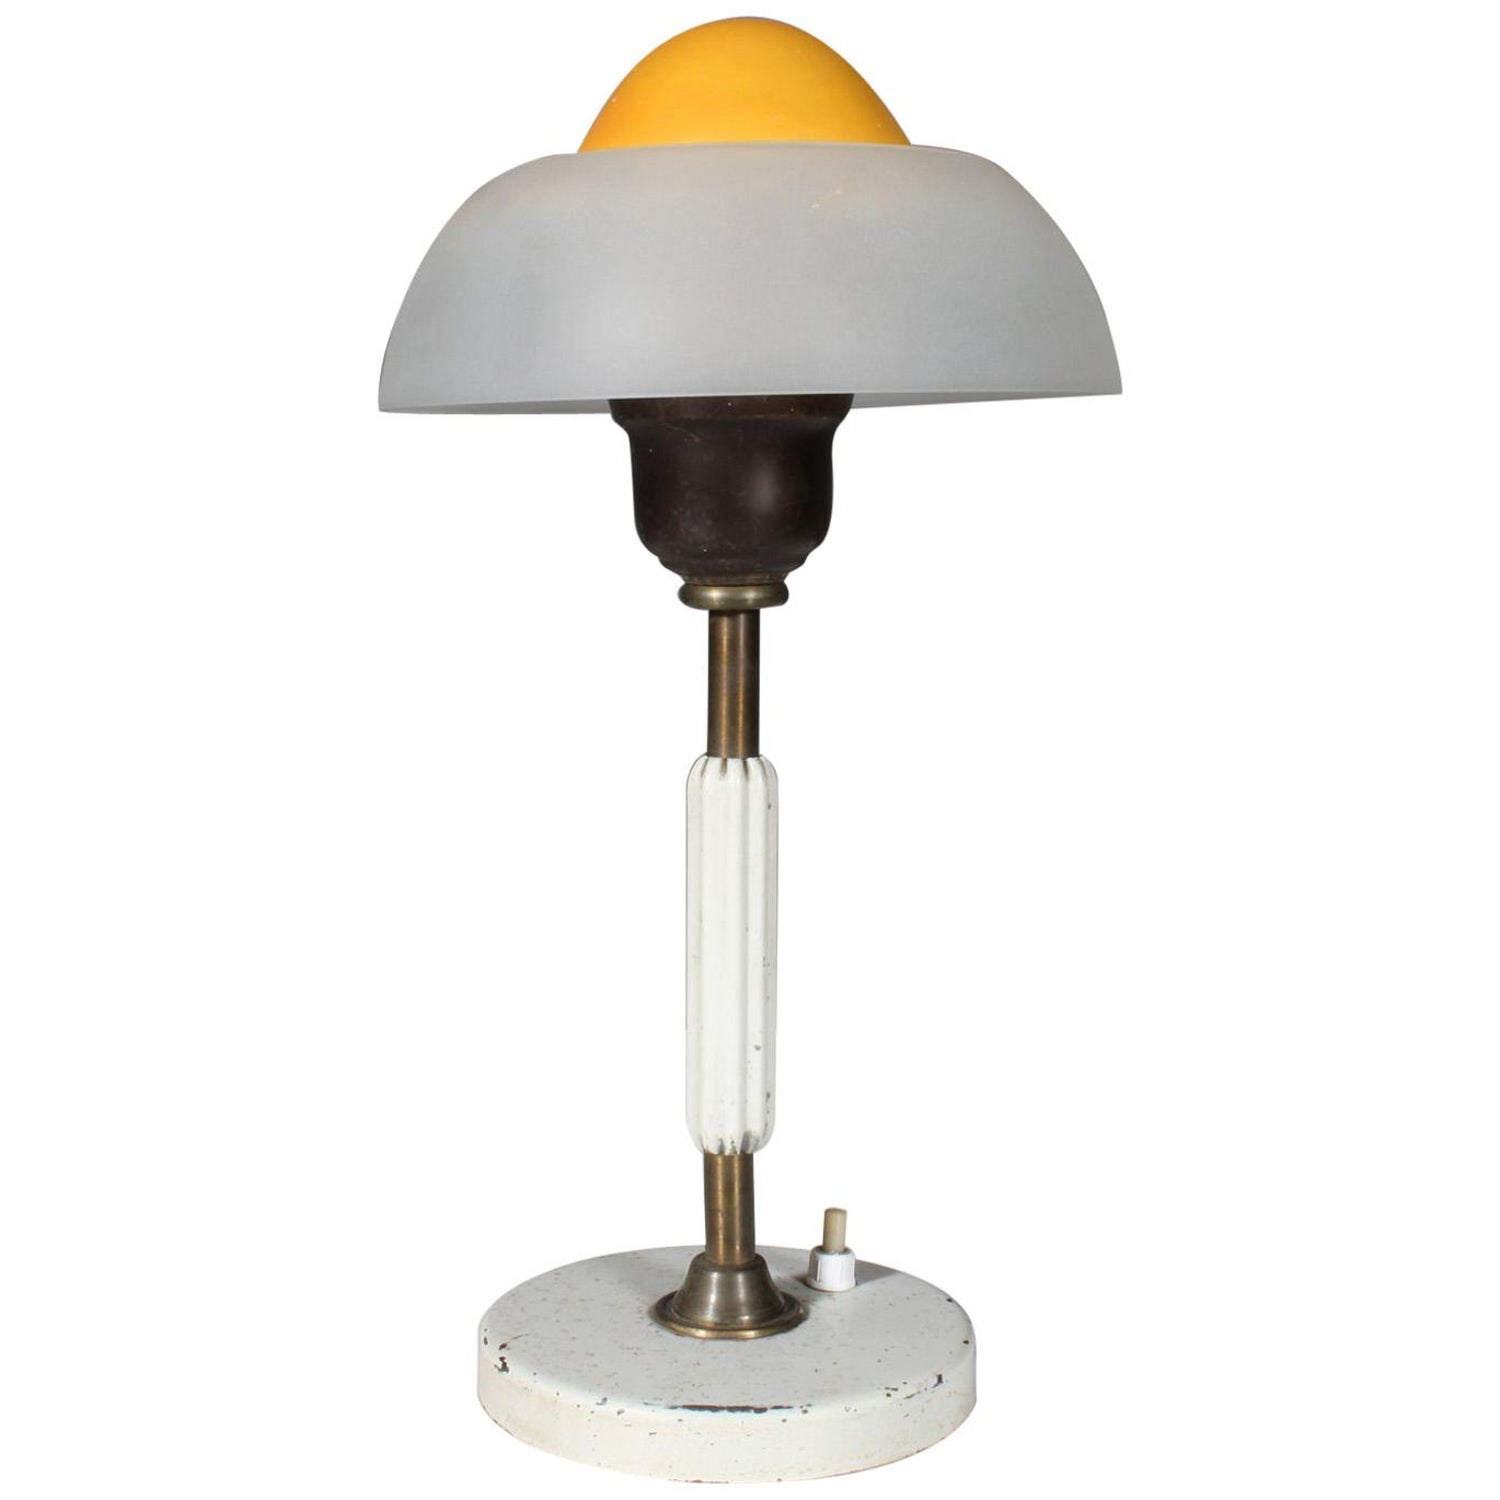 Fog and Mørup Table Lamp For Sale at 1stDibs